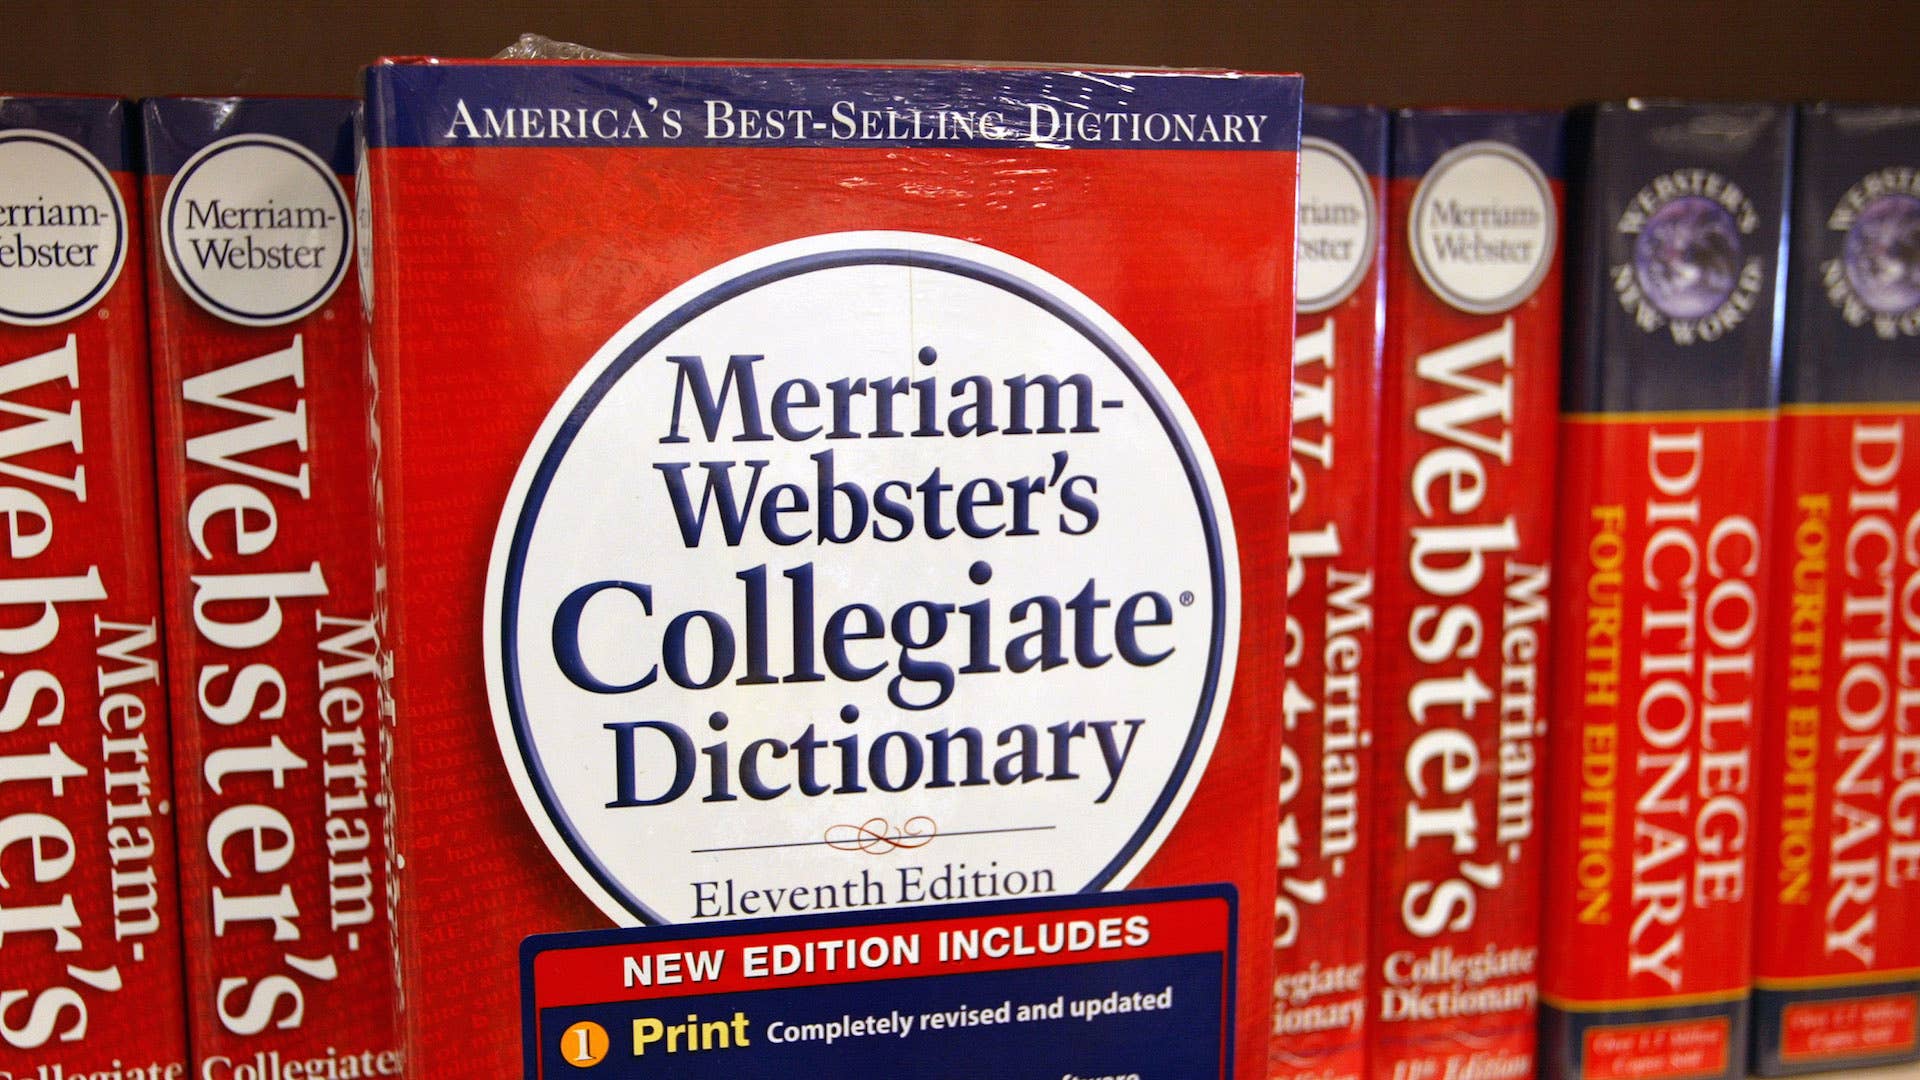 A Merriam Webster's Collegiate Dictionary is displayed in a bookstore.